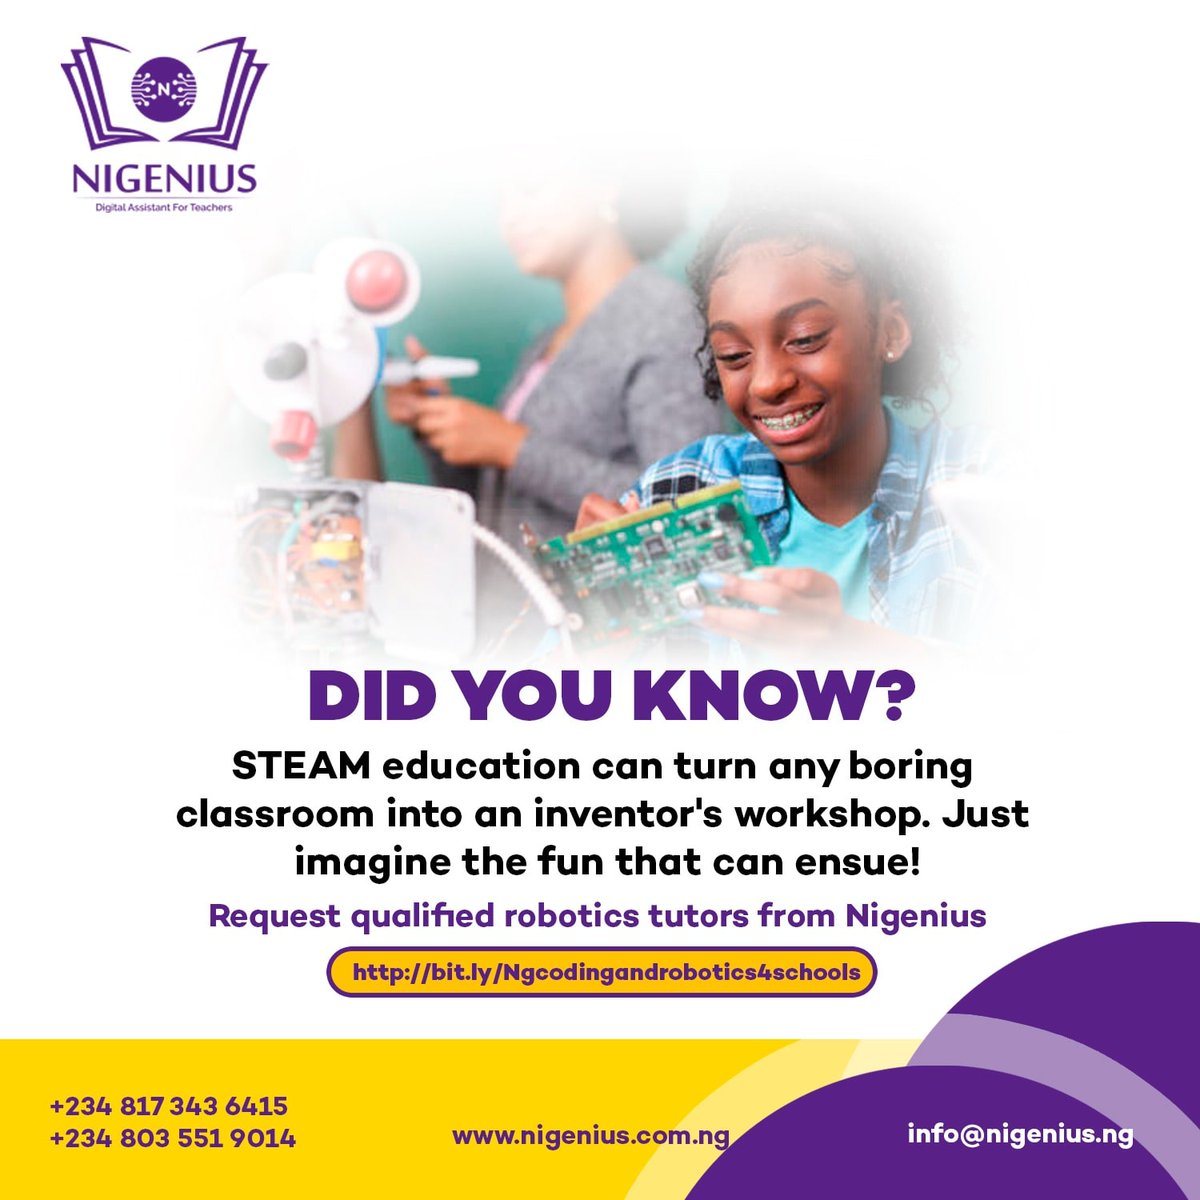 In the world of robotics and coding, innovation is inevitable.

Improve your school standards by adding Coding & Robotics to your curriculum.

To request Coding & Robotics tutors for your school,  use link bit.ly/Ngcodingandrob…

#Coding #robotics #steamfest #nigenius #kidcoder